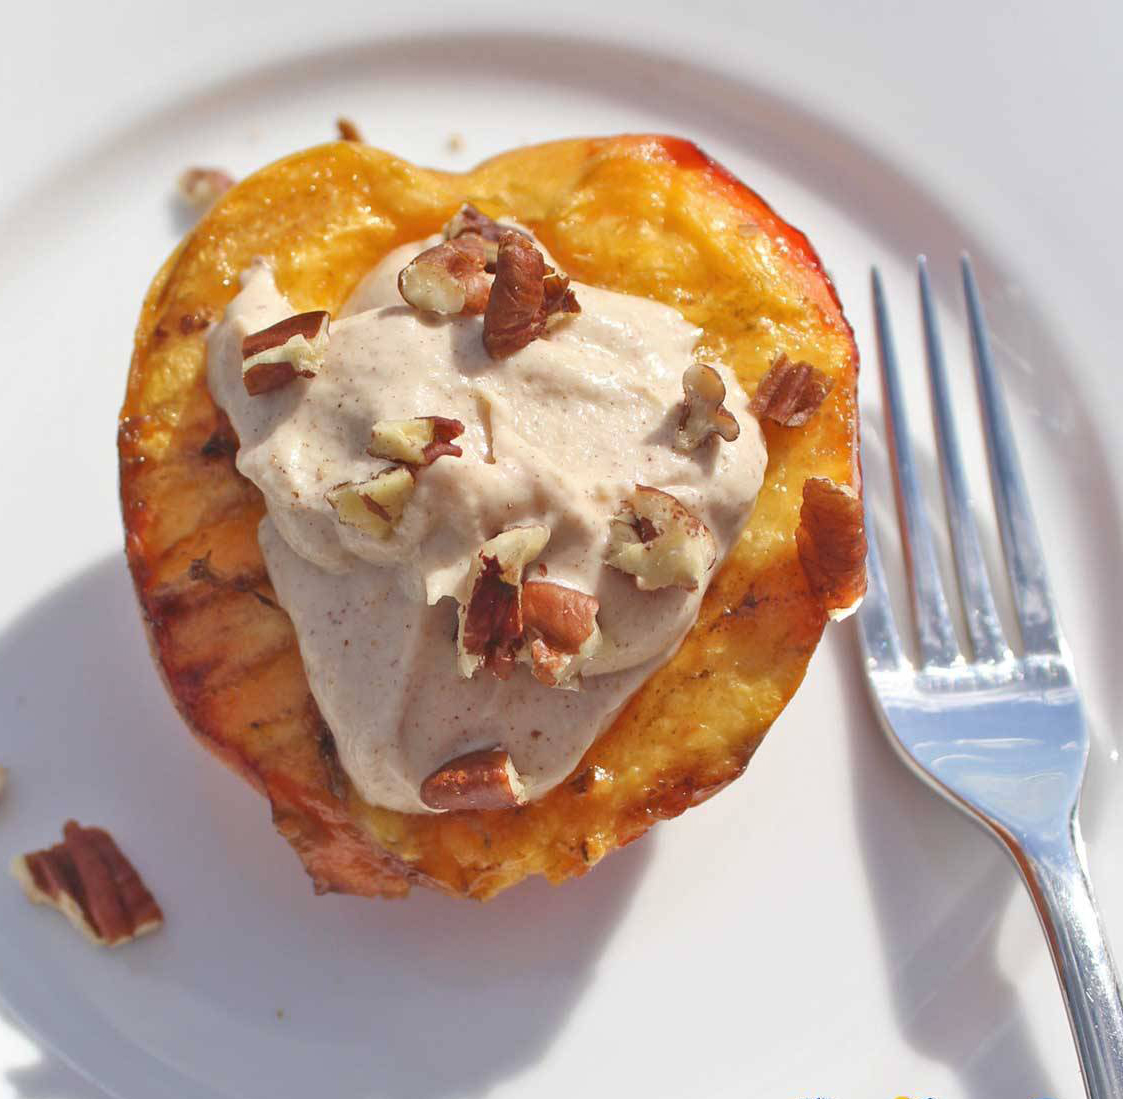 Serve the grilled peaches with a dollop or two of the cinnamon ricotta crème